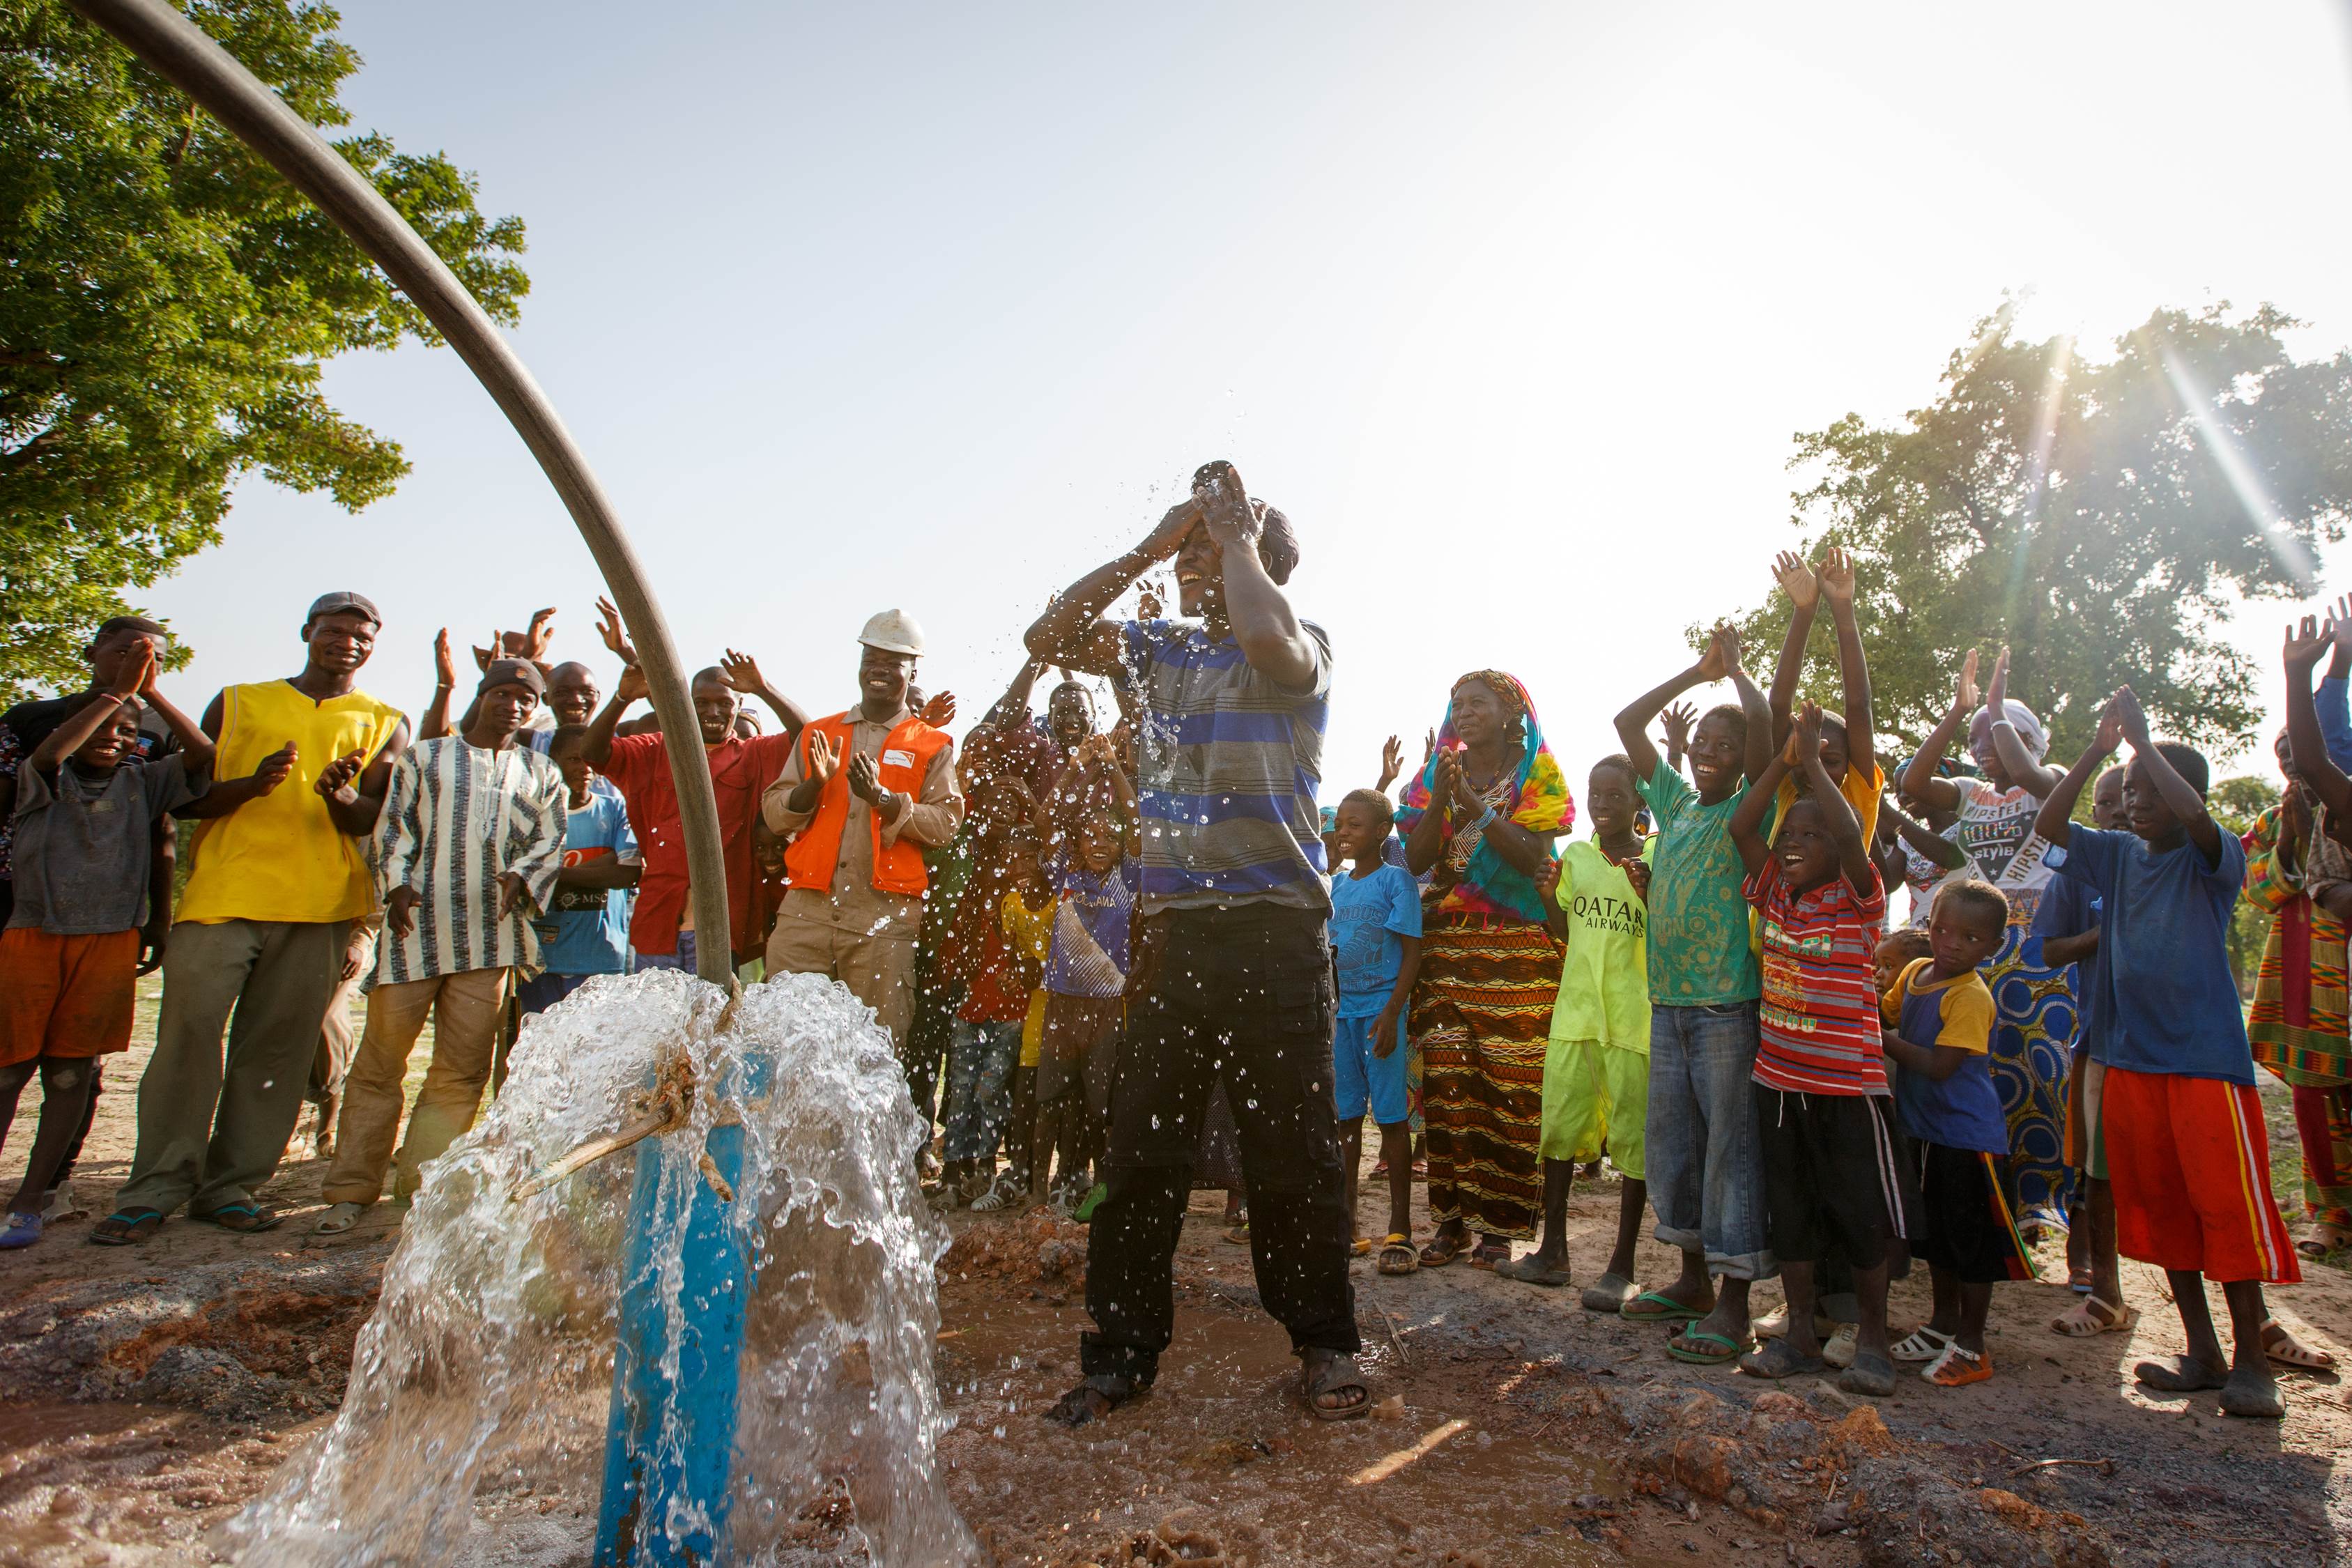 Entire community in Mali dances in celebration at a water pump opening ceremony that will transform the community